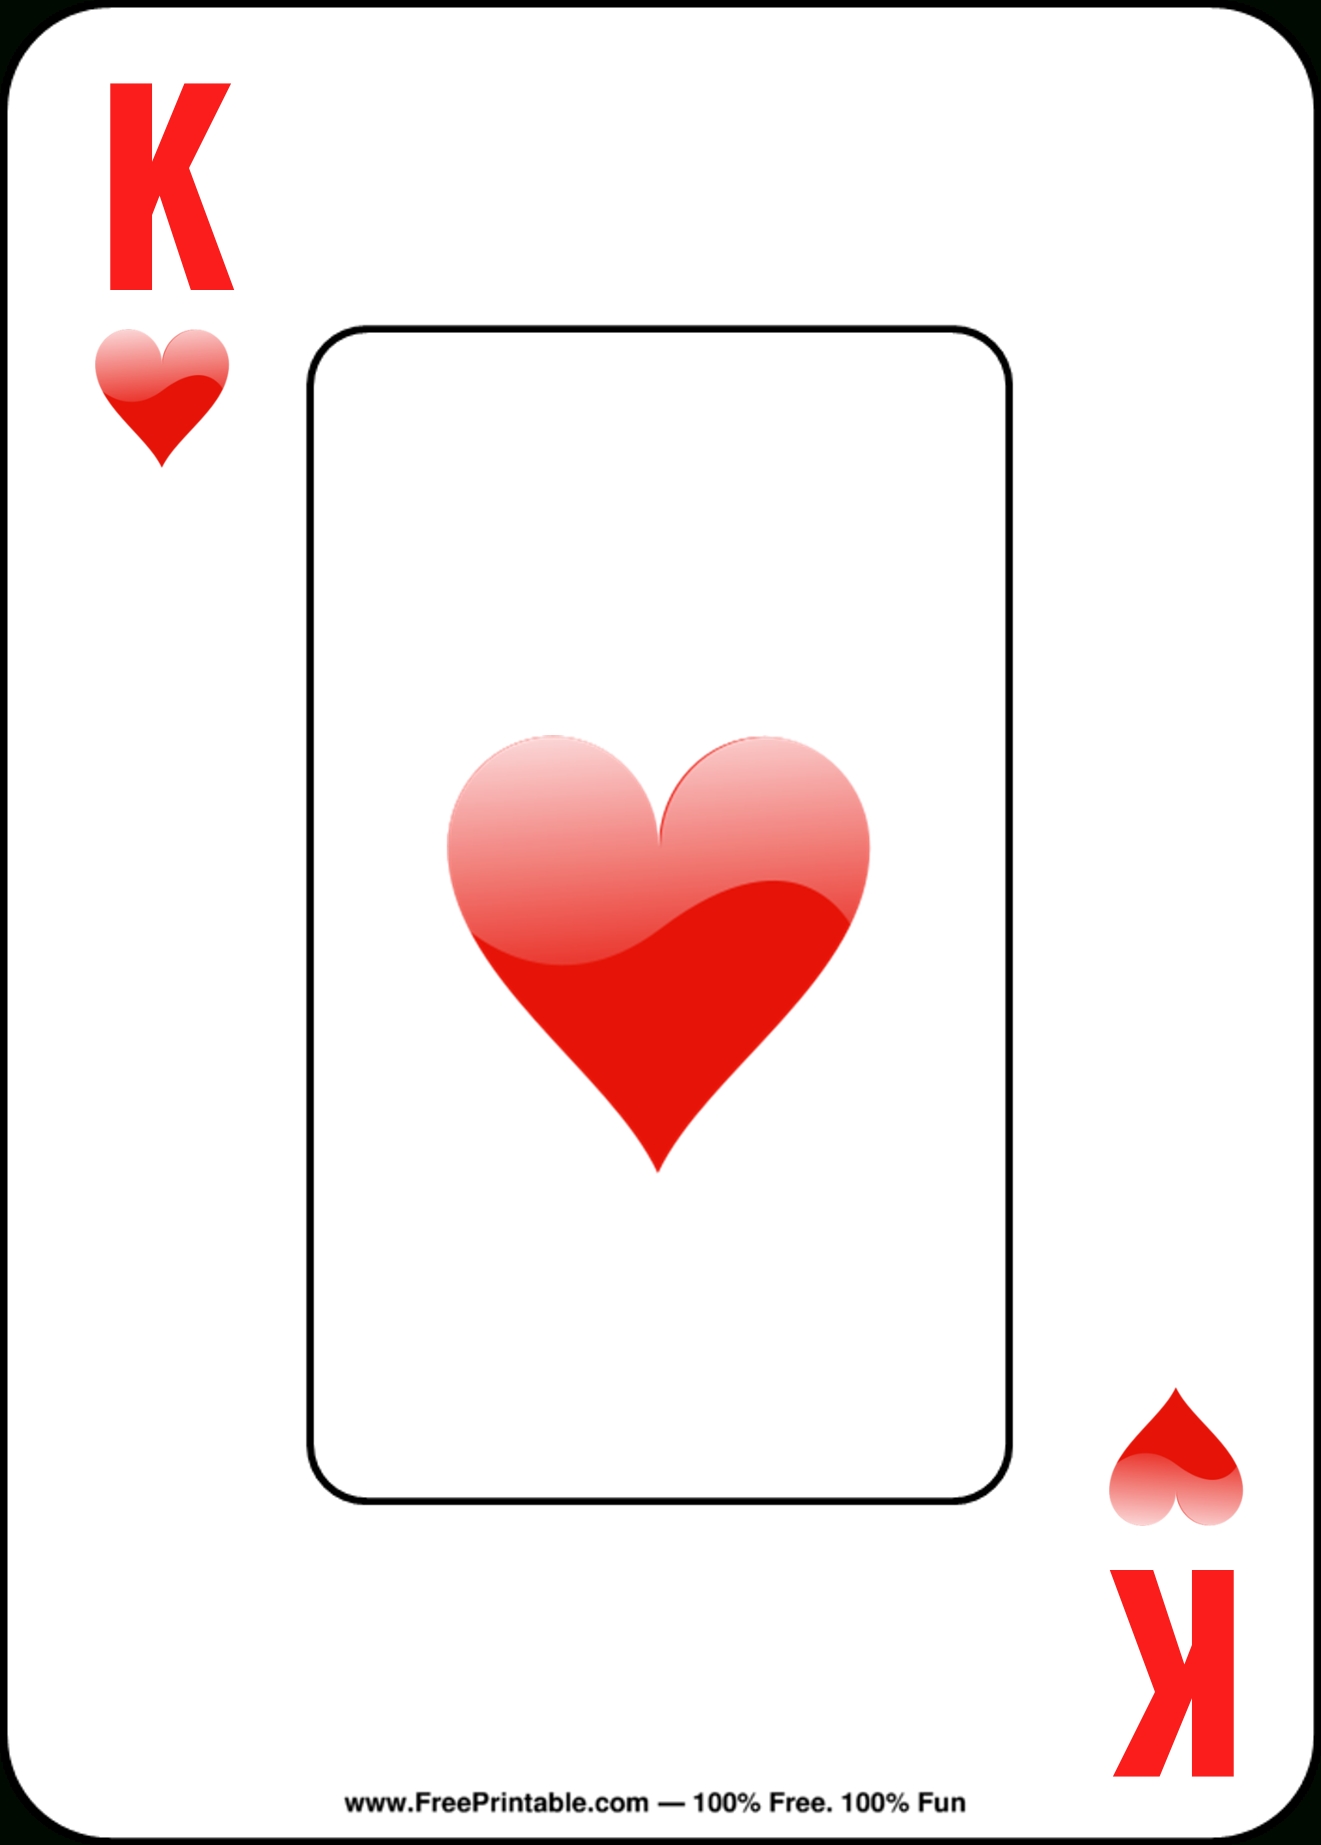 Free Printable Playing Cards Pertaining To Template For Playing Cards Printable